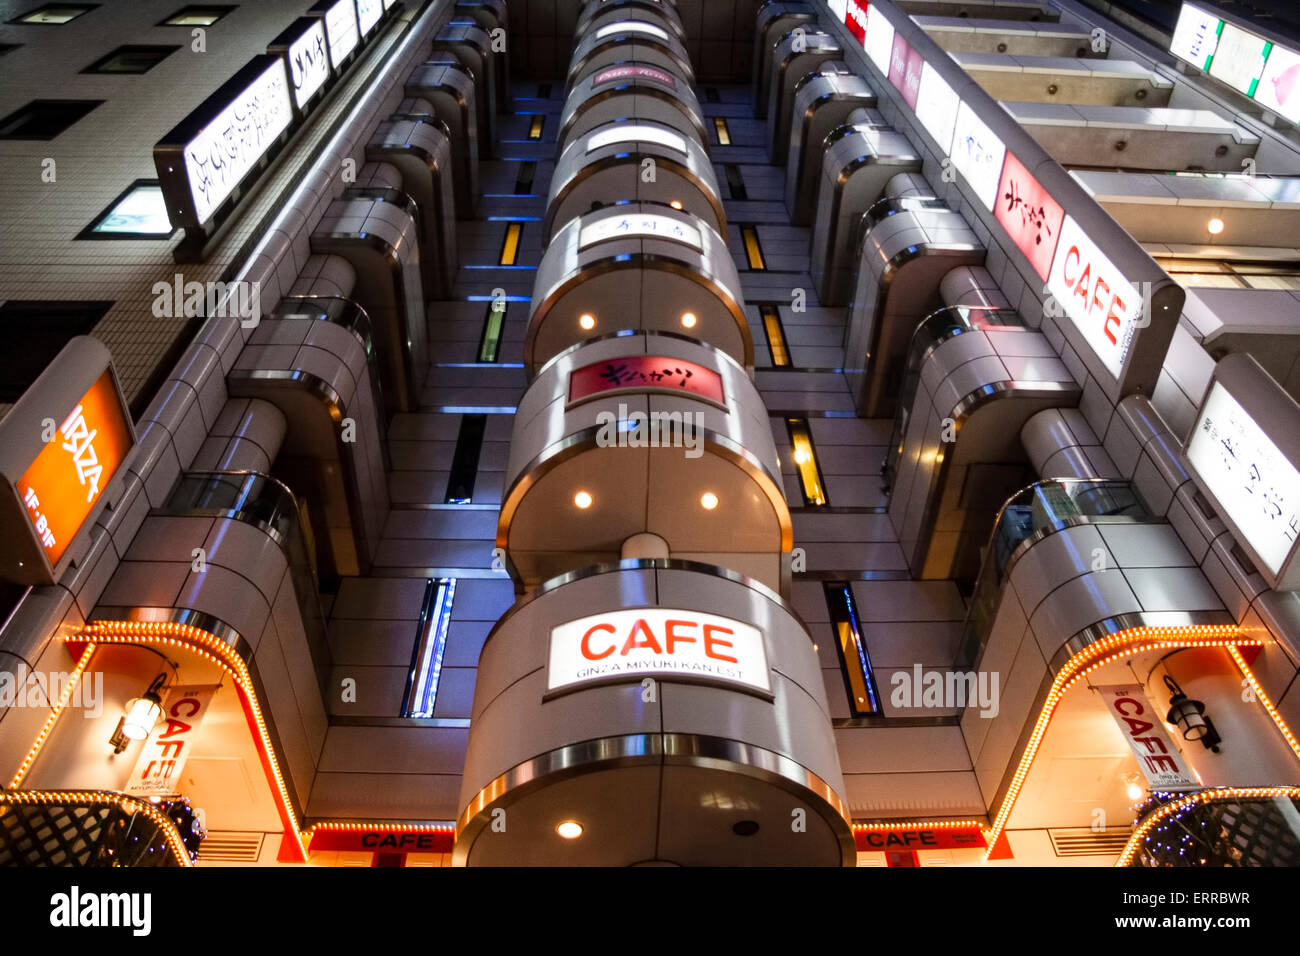 The Cafe de Ginza Miyuki-kan in the distinctive W facade shape of the Ginza Act Building in Tokyo at night. Low angle view looking up the building. Stock Photo